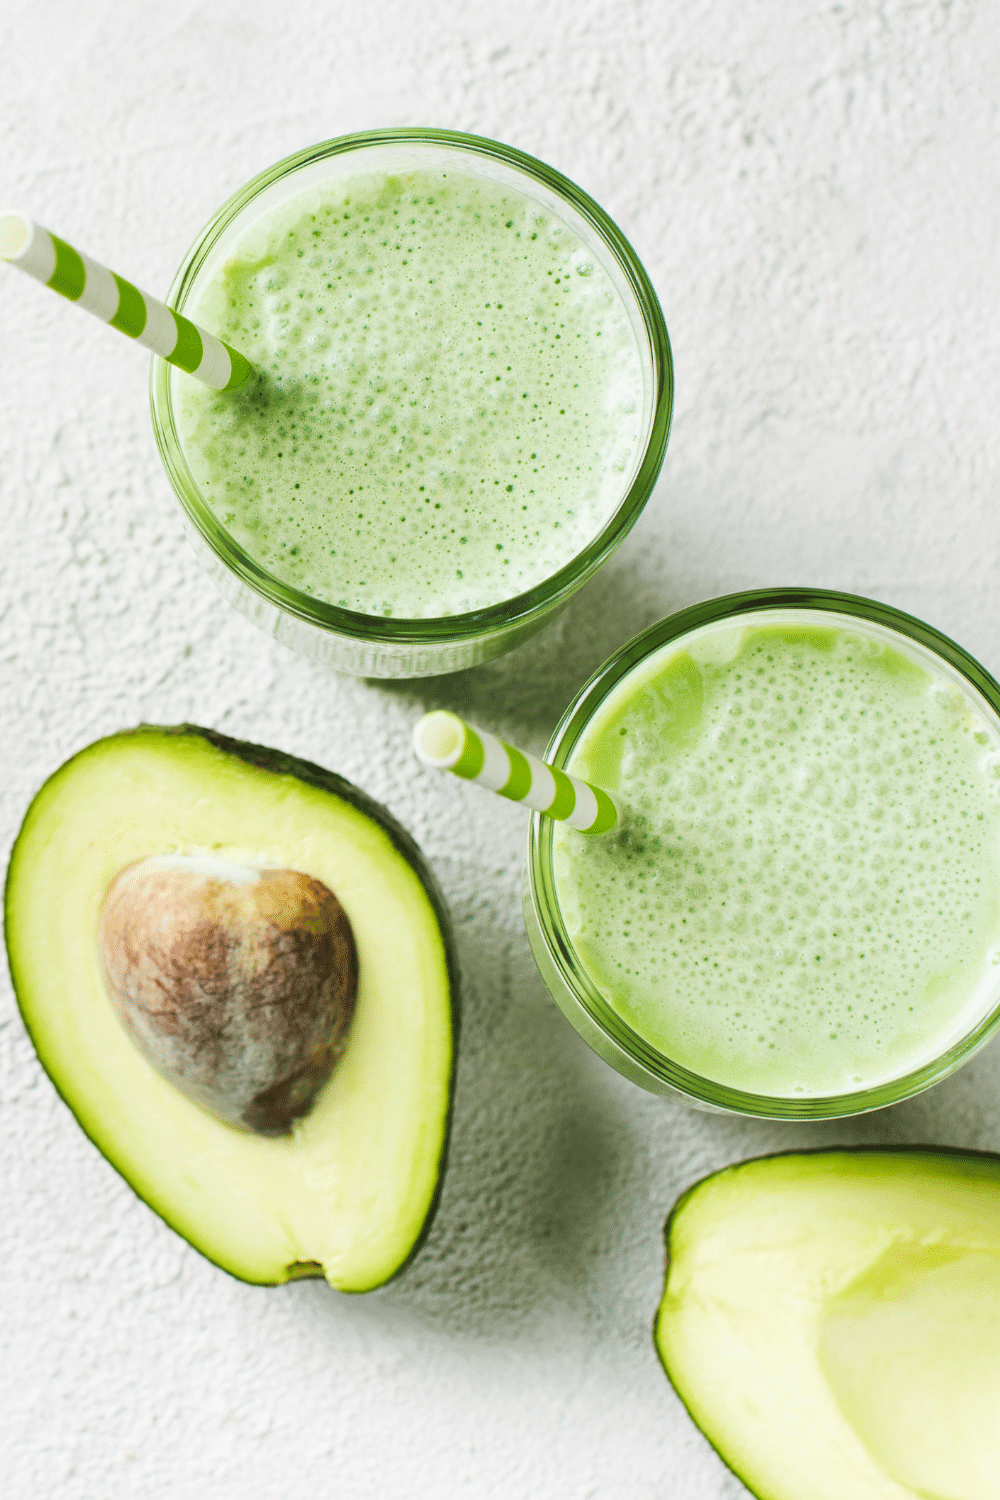 A creamy pale green avocado smoothie in a glass, adorned with a slice of ripe avocado.